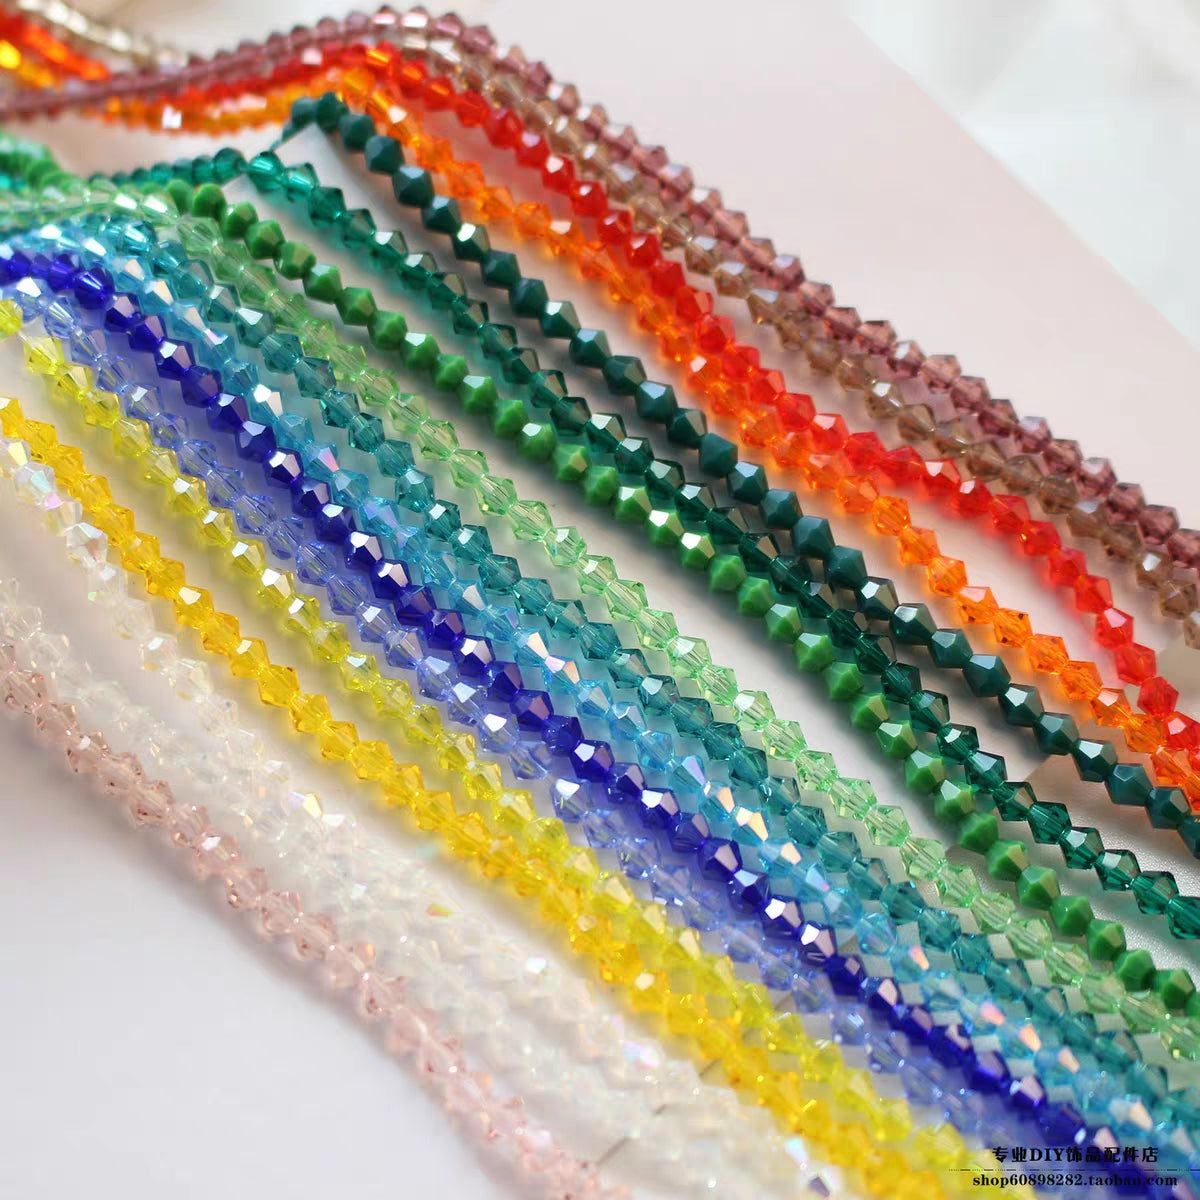 4mm Crystal Bicone Beads